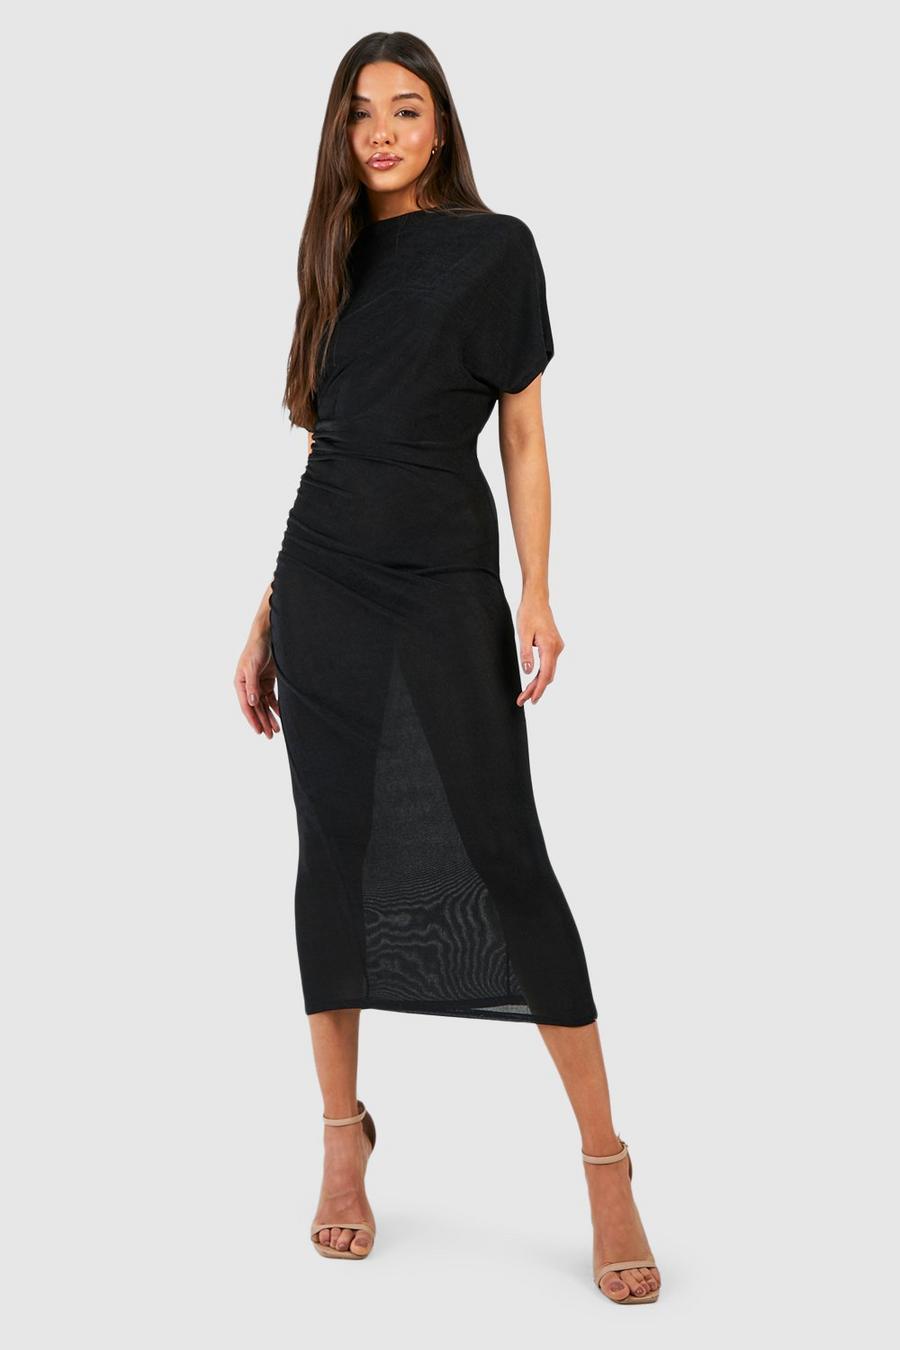 Black High Neck Ruched Acetate Slinky Midaxi Dress